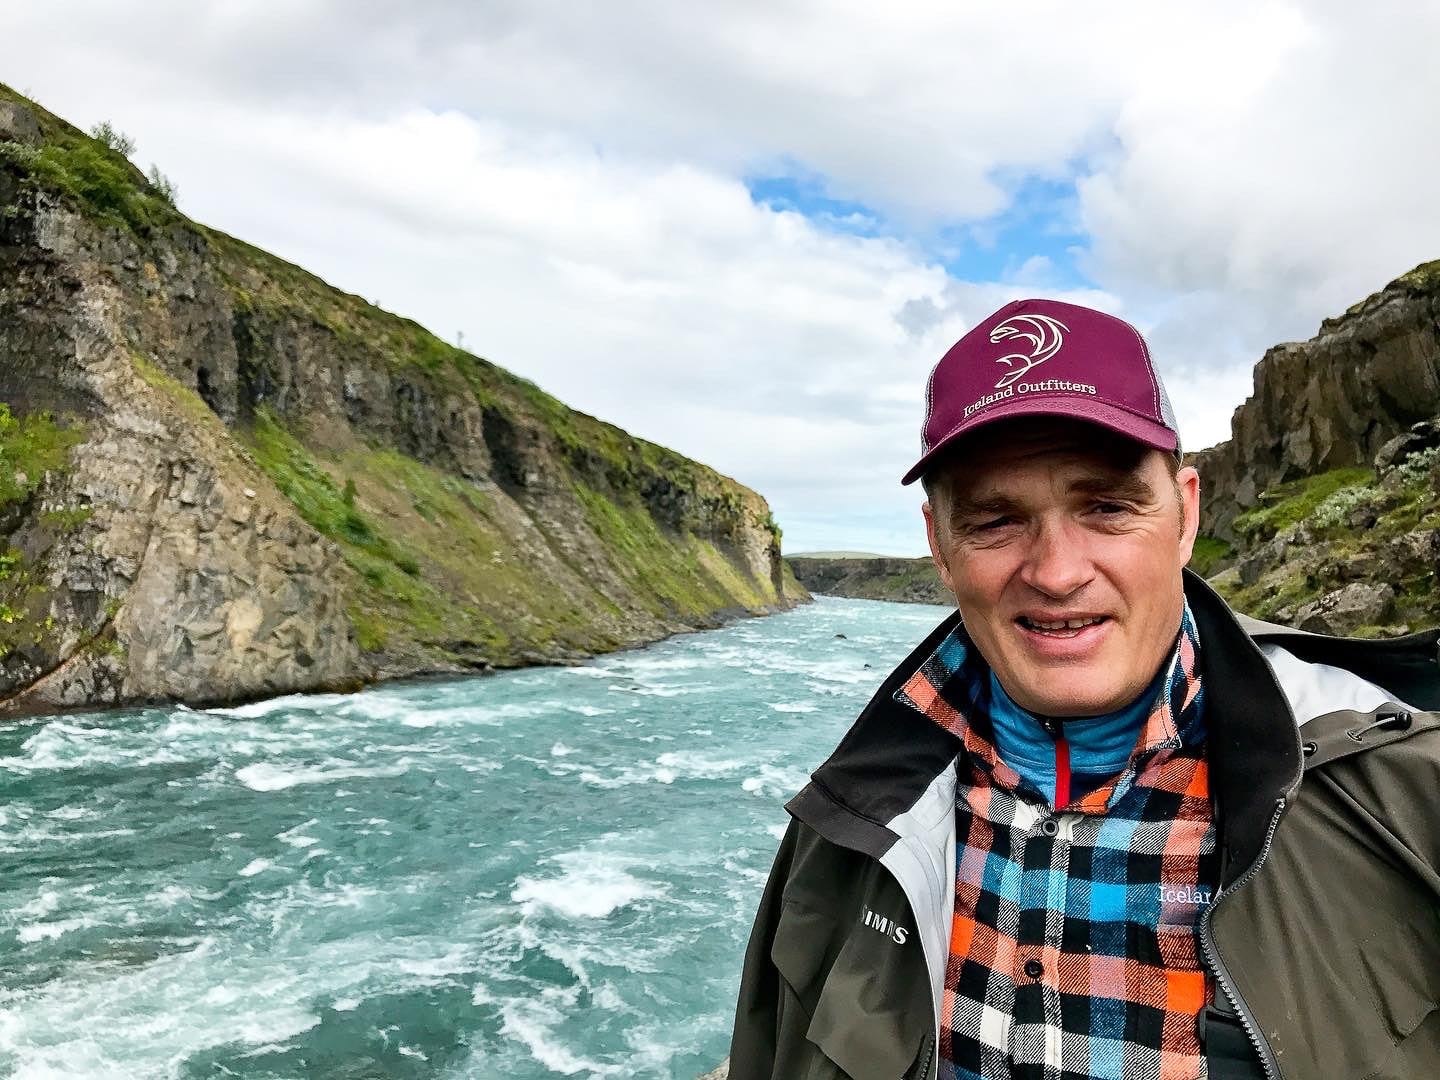 Master angler and Iceland Outfitters co-owner, Stefán casts a line